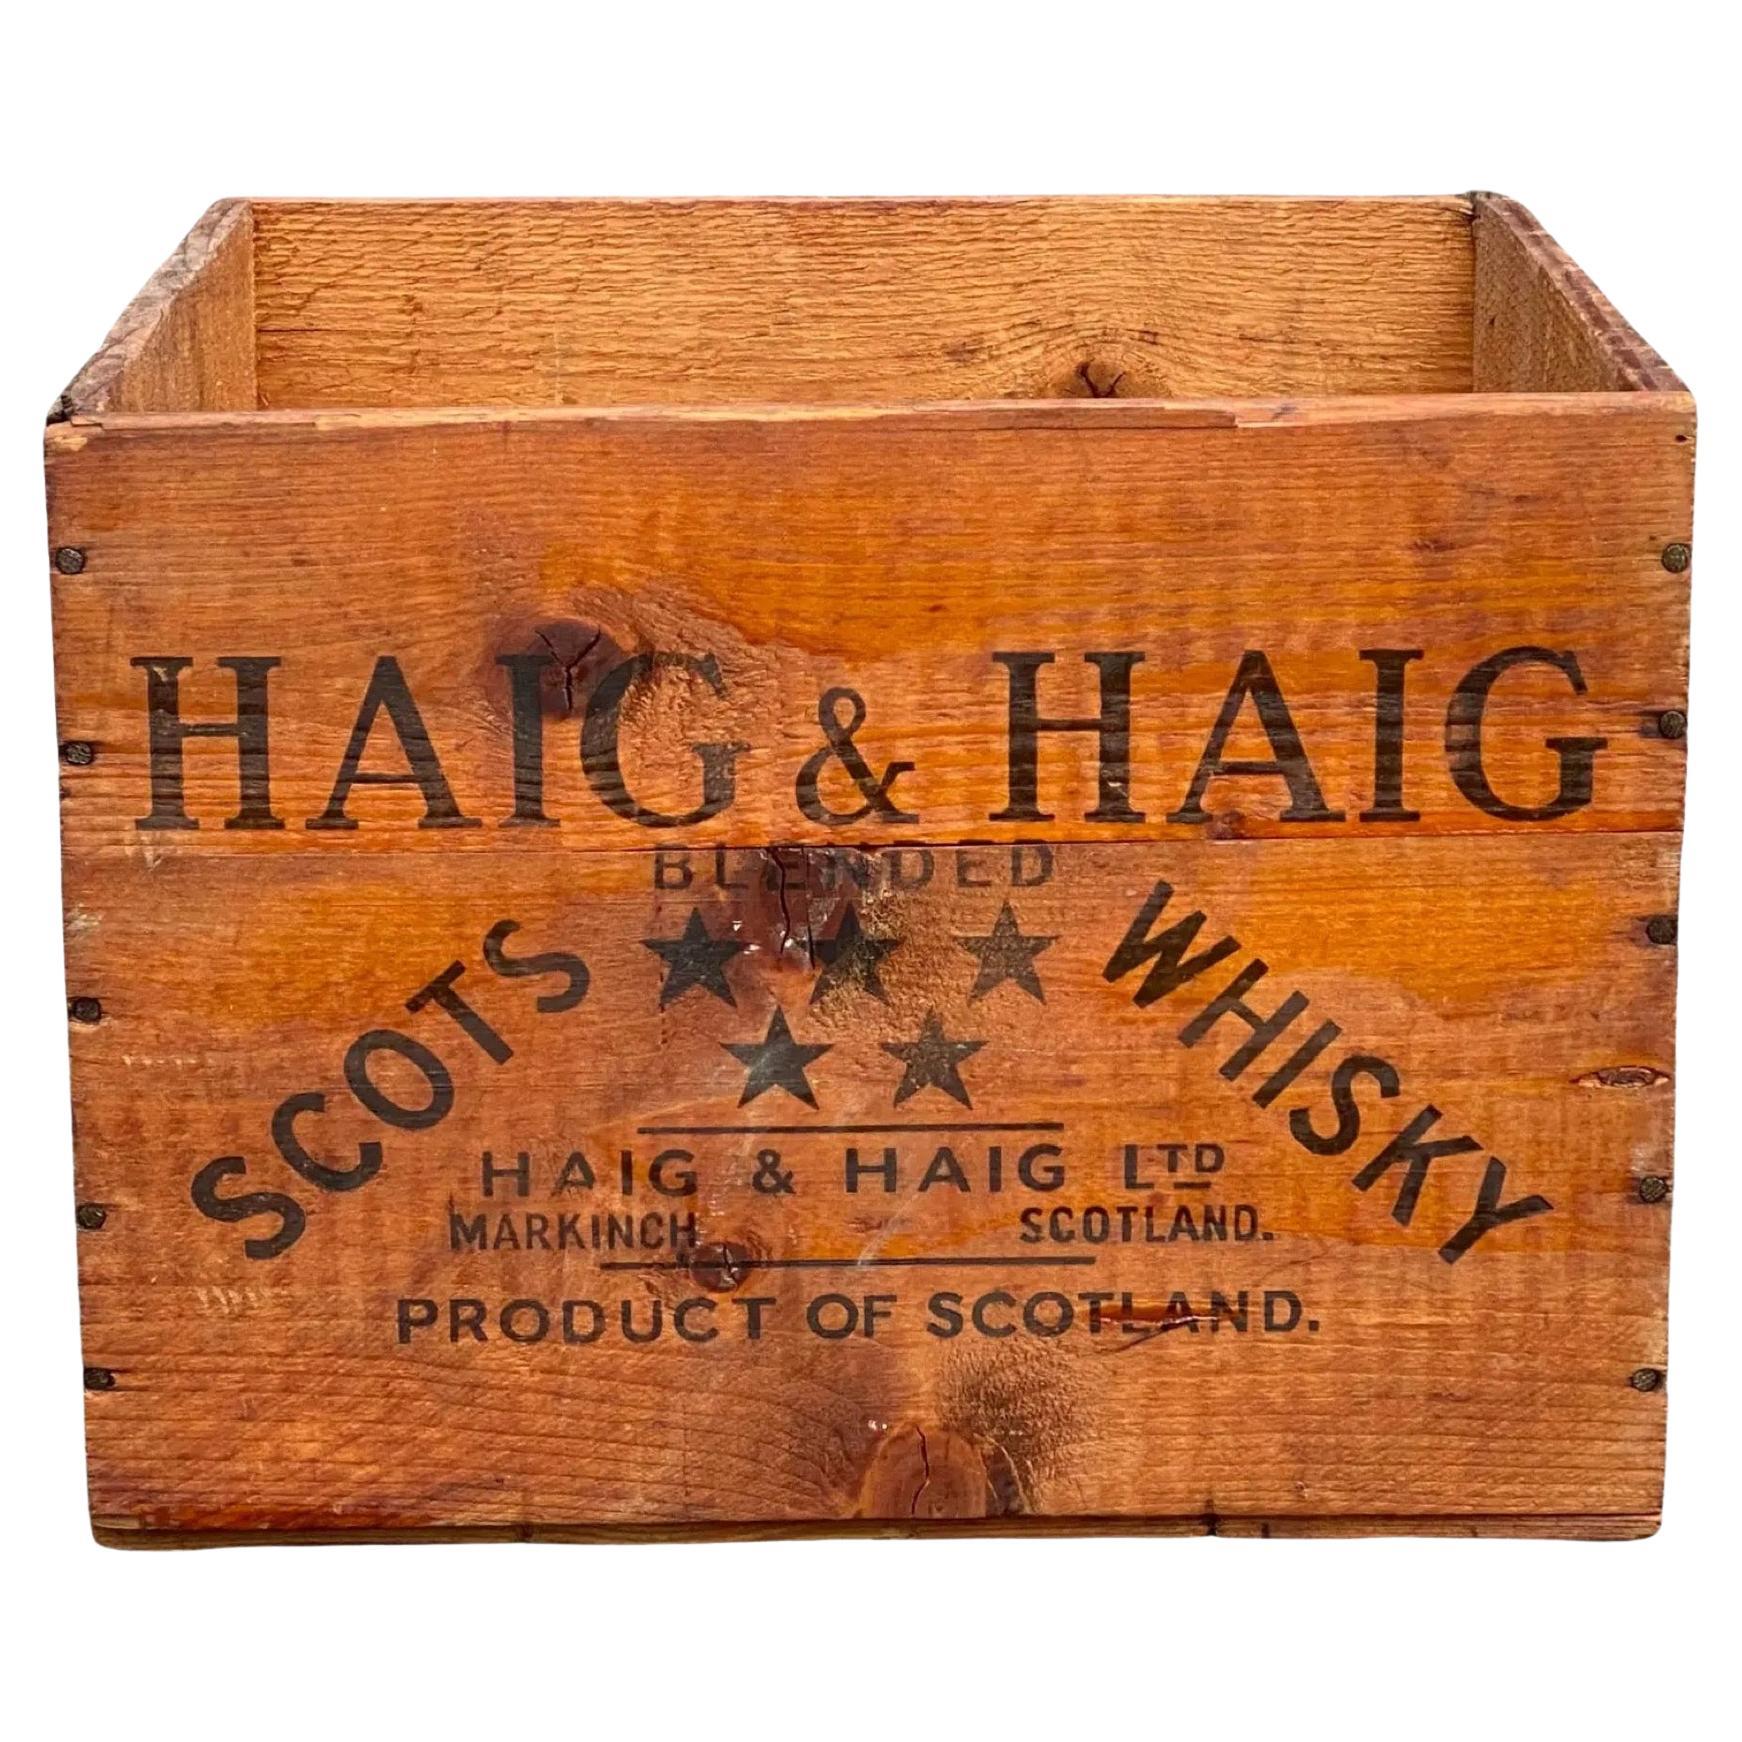 1950's Haig and Haig Wooden Whisky Crate For Sale at 1stDibs  haig and  haig scotch, white horse cellar scotch whisky crate